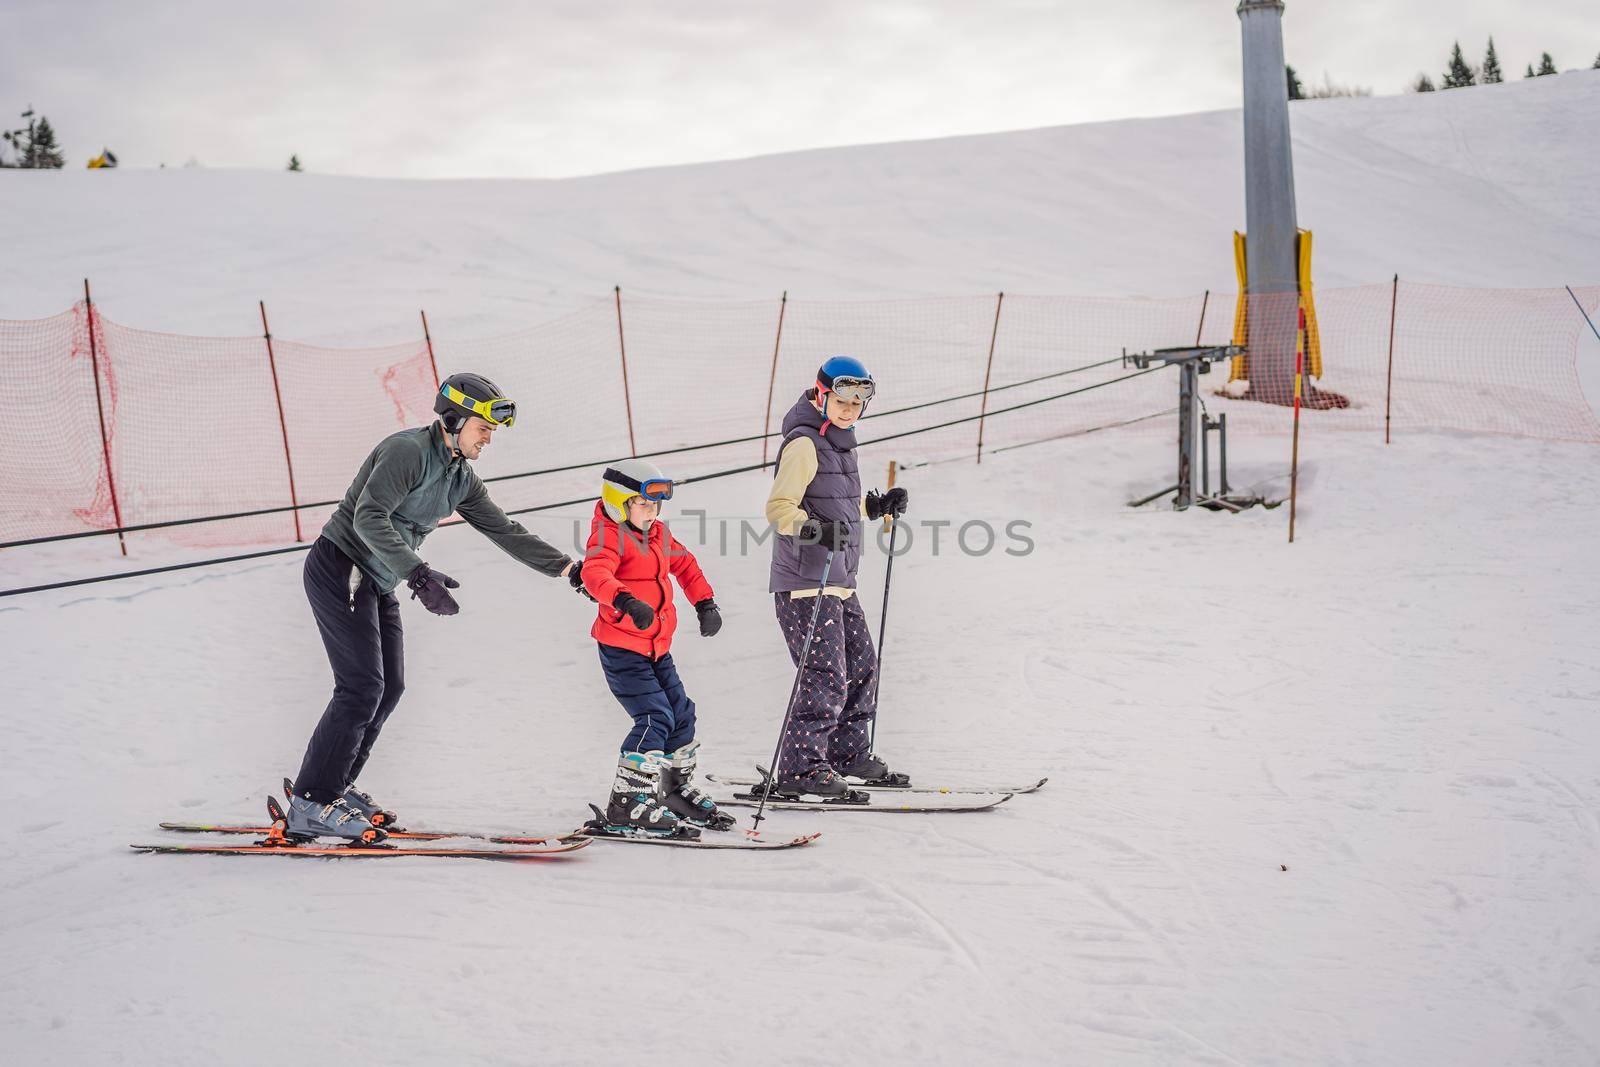 Mom and son are learning to ski with an instructor.Active toddler kid with safety helmet, goggles and poles. Ski race for young children. Winter sport for family. Kids ski lesson in alpine school. Little skier racing in snow.